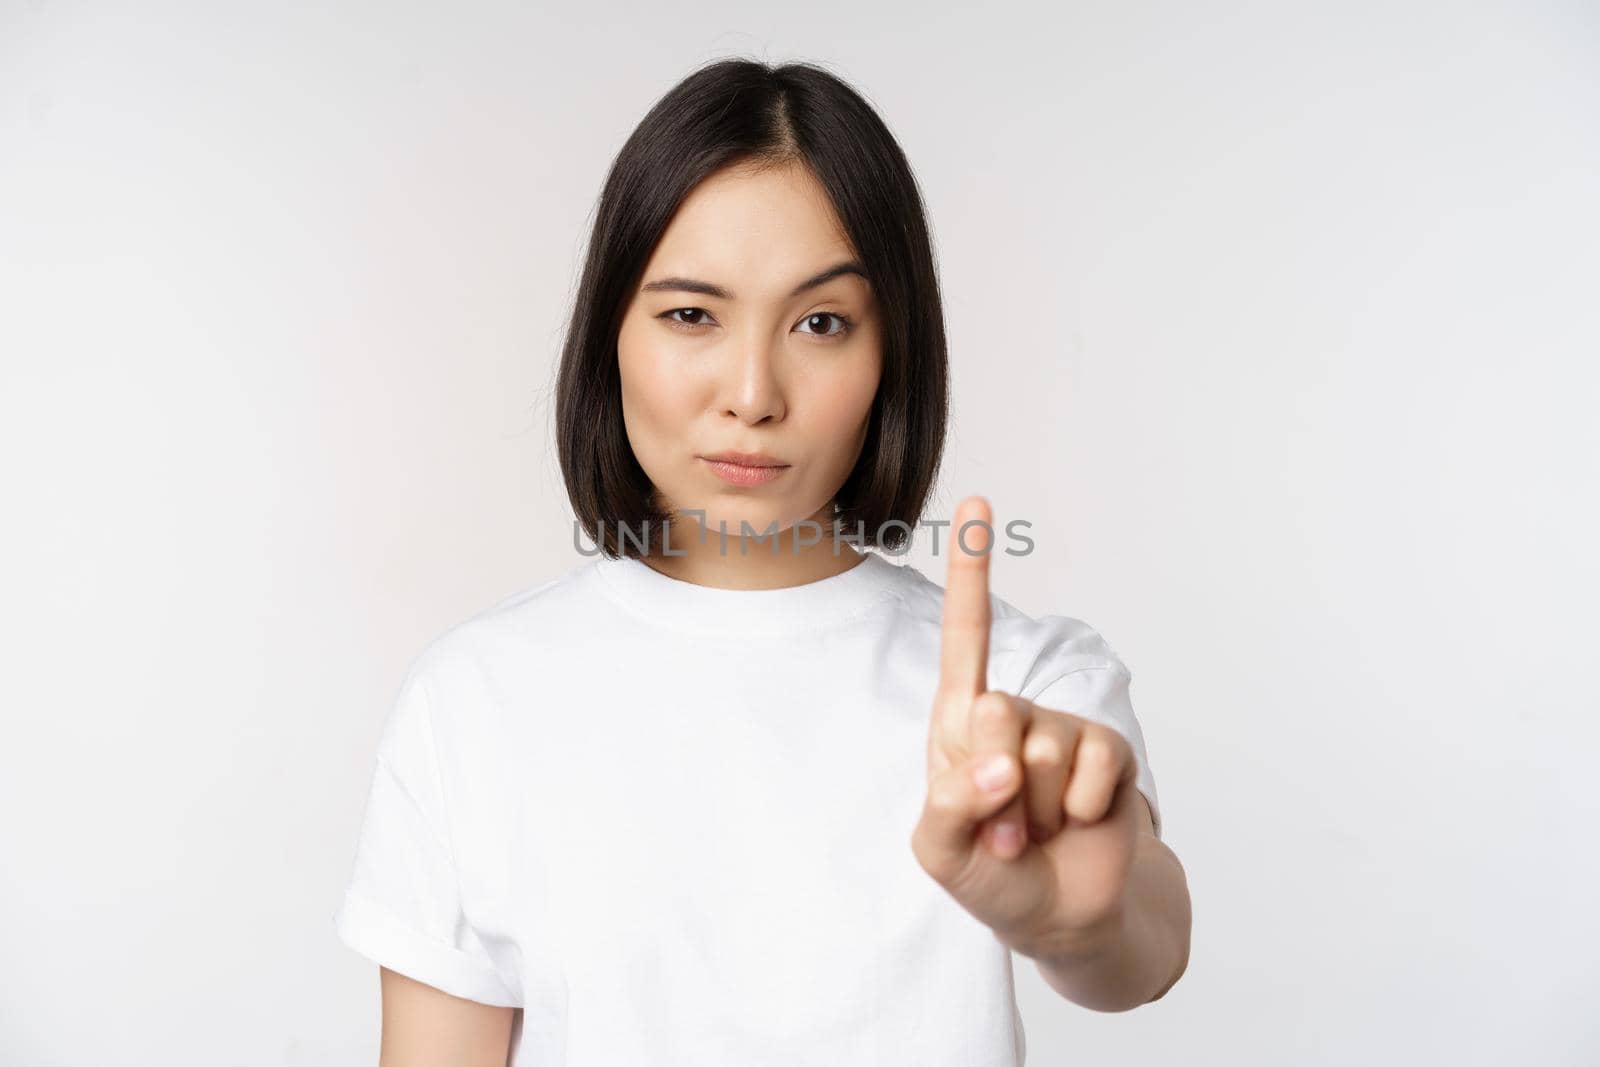 Image of asian girl showing stop, prohibit smth, extend one arm to show forbidding, taboo gesture, standing in tshirt over white background.